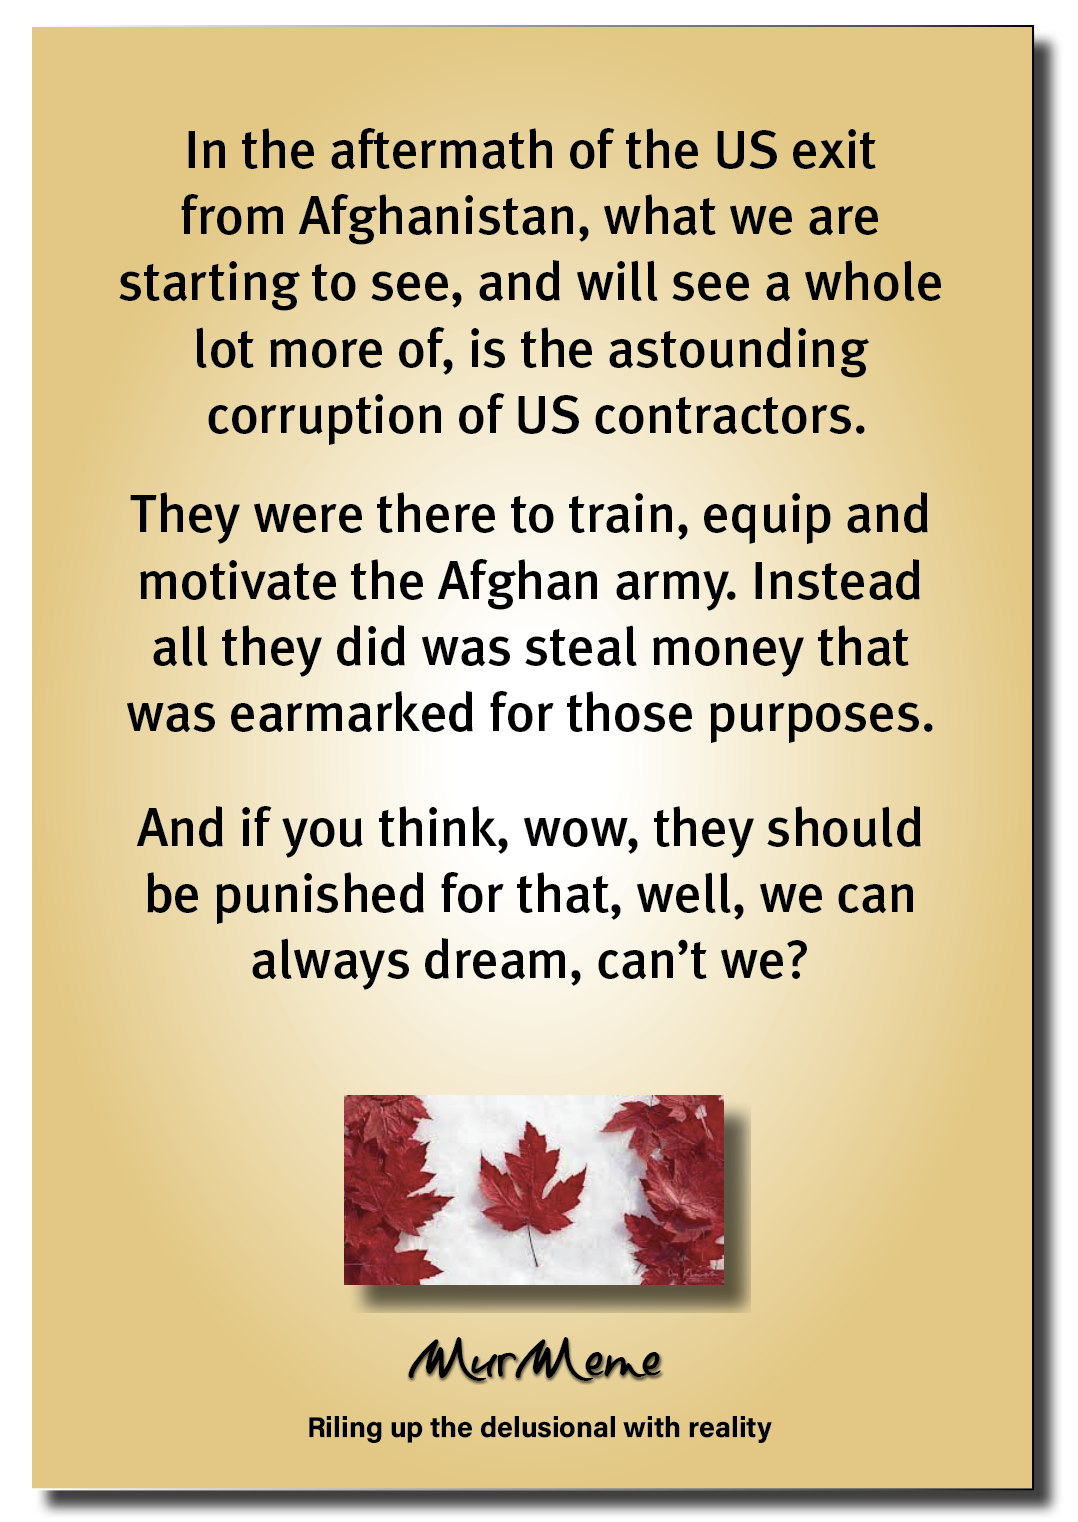 In the aftermath of the US exit
from Afghanistan, what we are
starting to see, and will see a whole
lot more of, is the astounding
corruption of US contractors.

They were there to train, equip and
motivate the Afghan army. Instead
all they did was steal money that

was earmarked for those purposes.

And if you think, wow, they should
be punished for that, well, we can
always dream, can’t we?

W

Mur ene

Riling up the delusional with reality